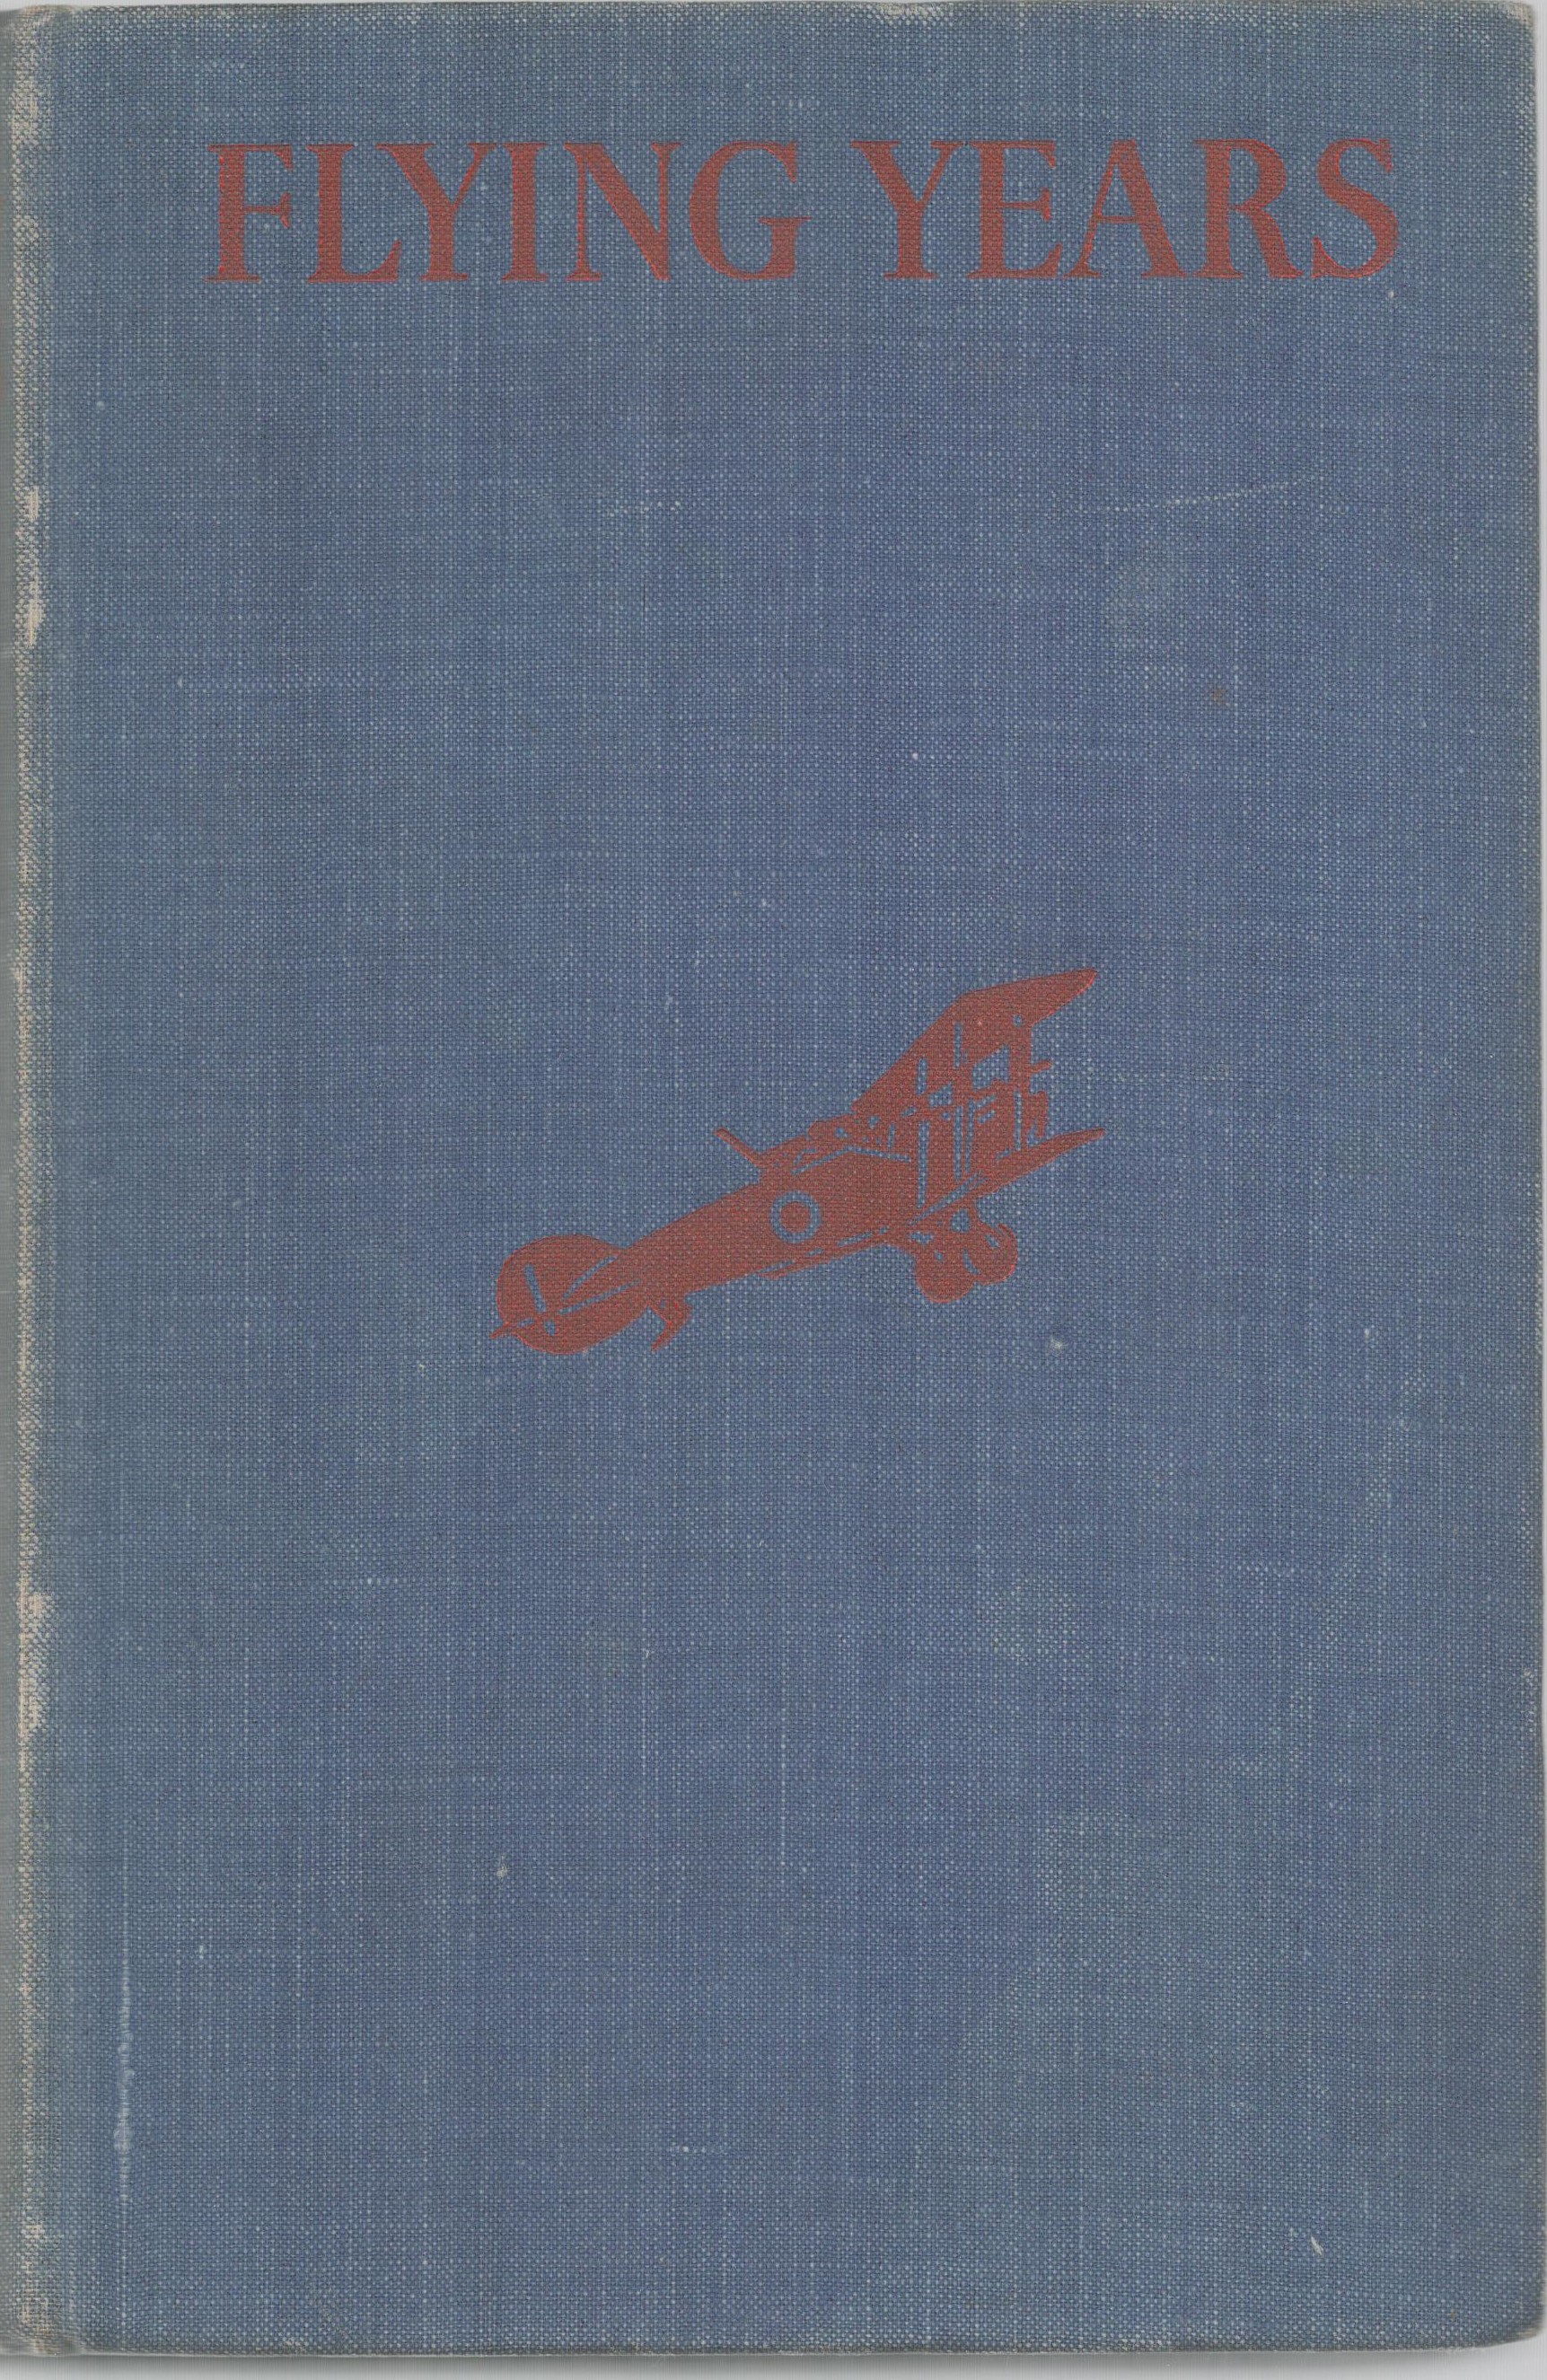 Wing Commander C N CARPENTER (29236) RAF Signed Book Flying Years by C H Keith Special Edition